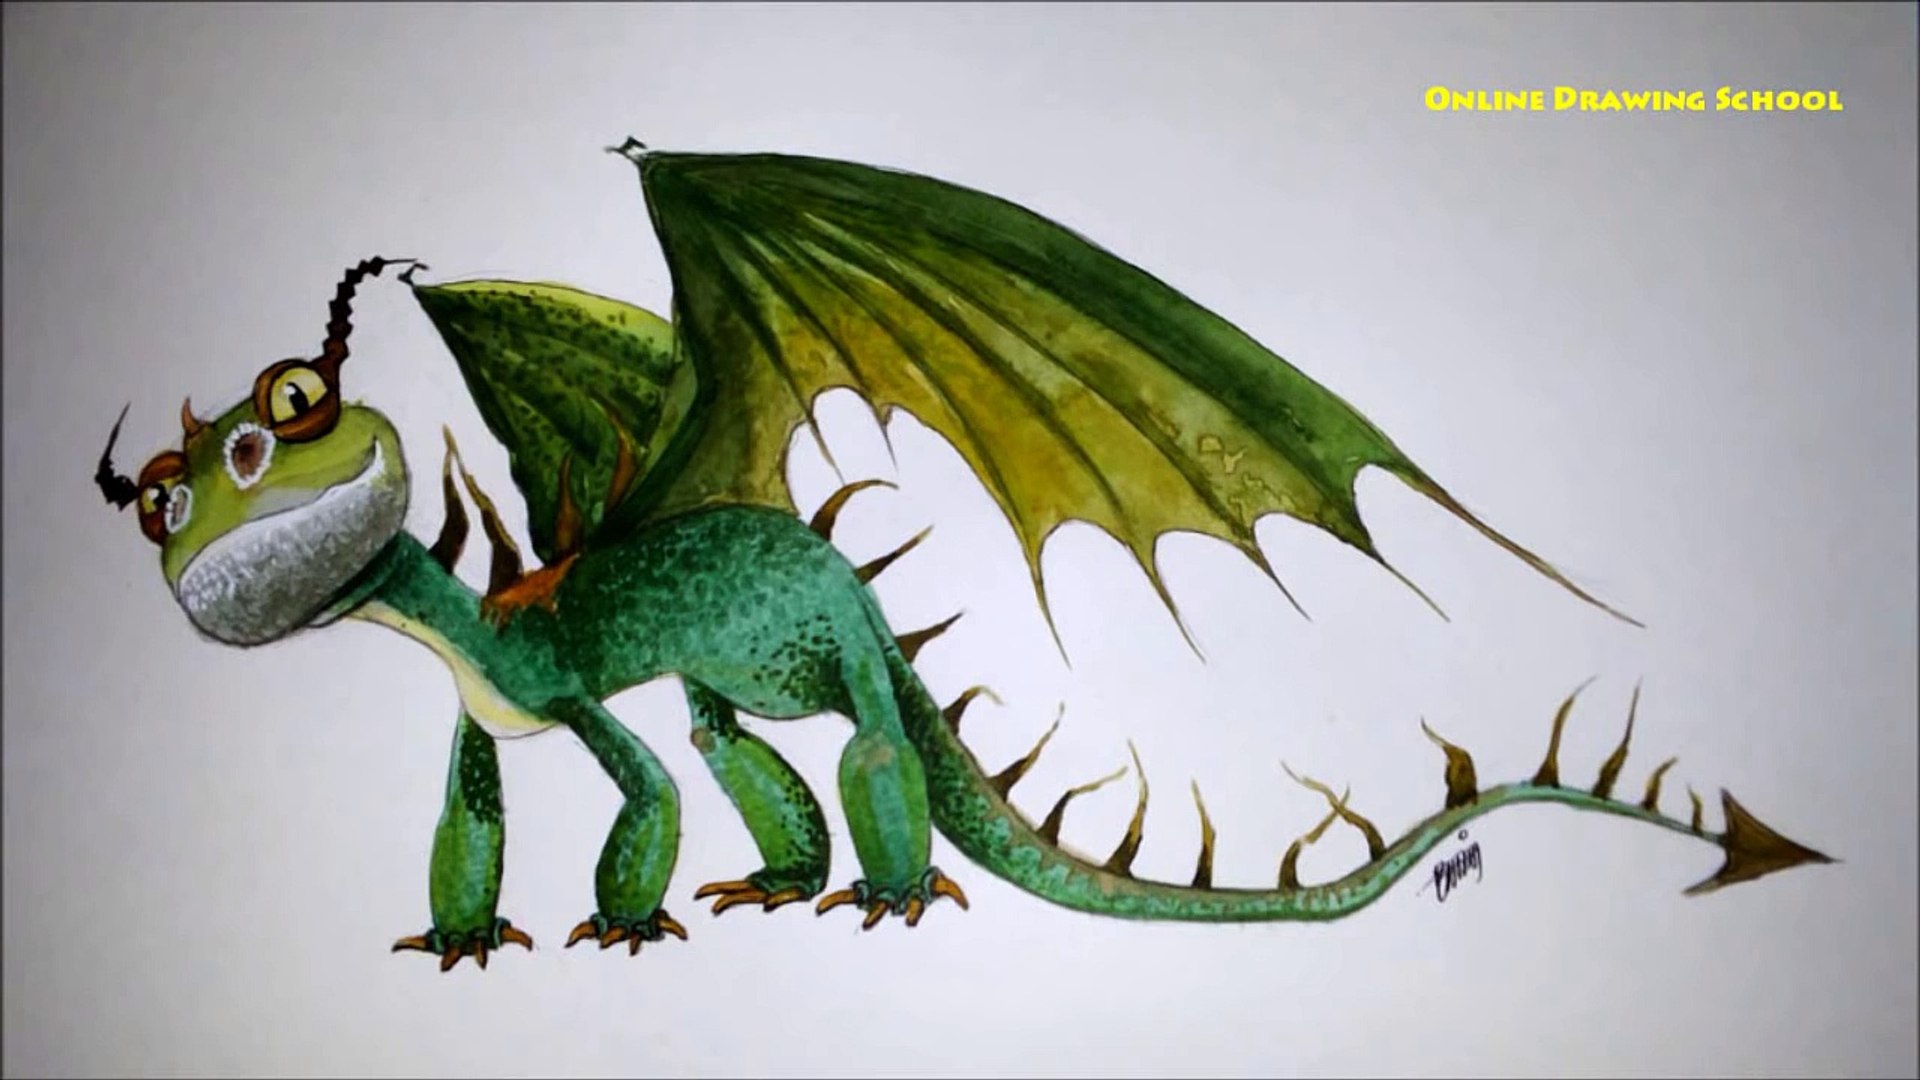 How to Draw Terrible Terror from How to Train Your Dragon and How to Train Your Dragon 2.